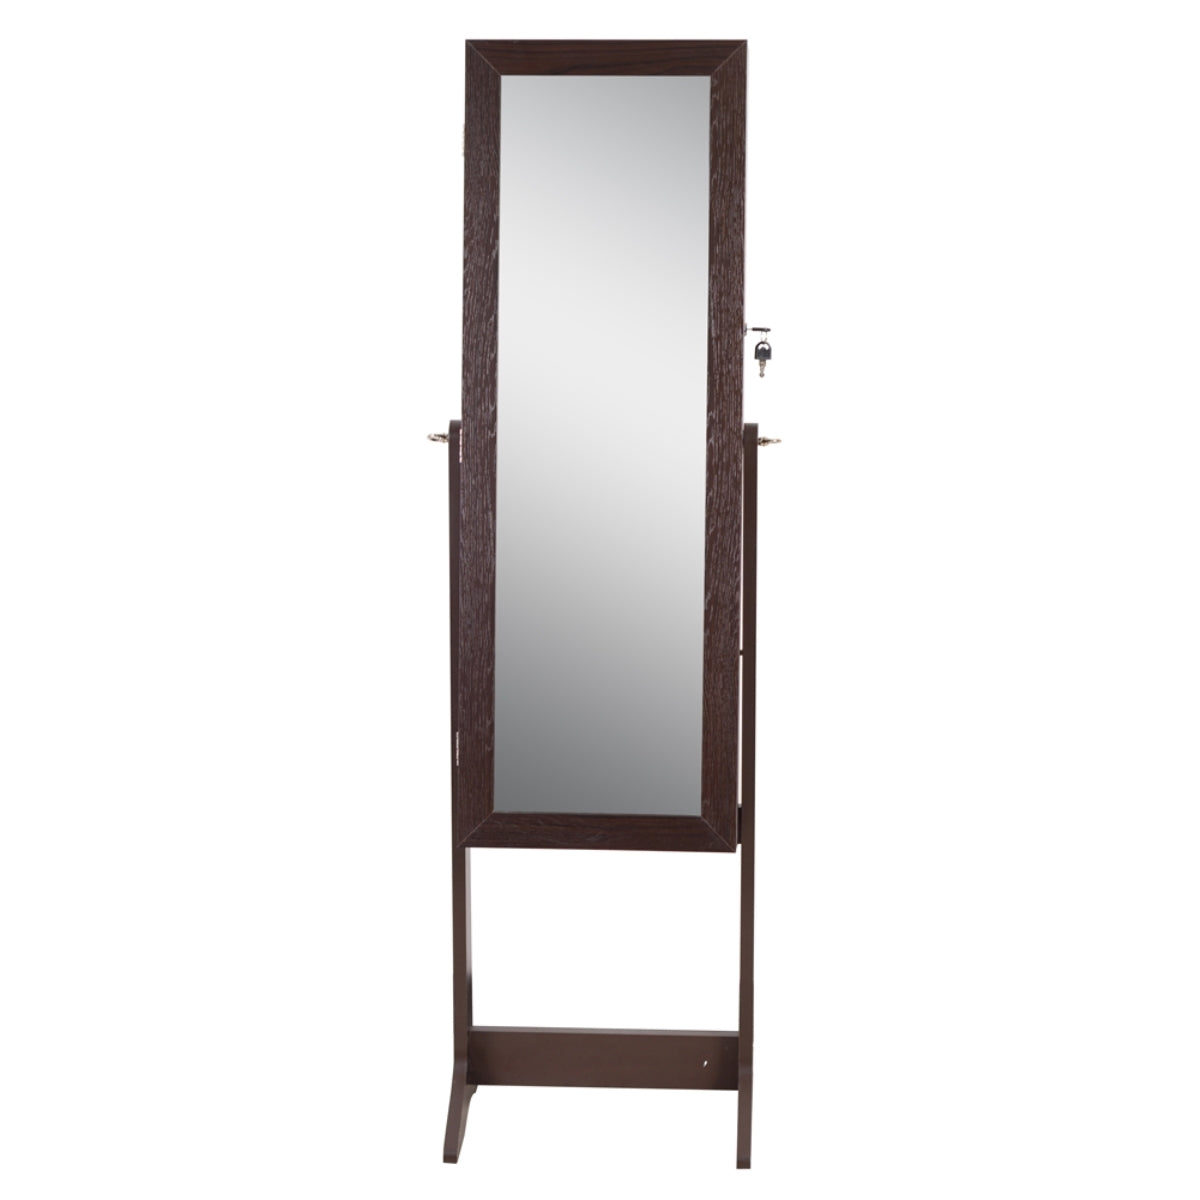 ViscoLogic RETRO STAR Wooden Free Floor Standing Wall Hang-able Mirrored Jewelry Organizer Cabinet Armoire (Brown)